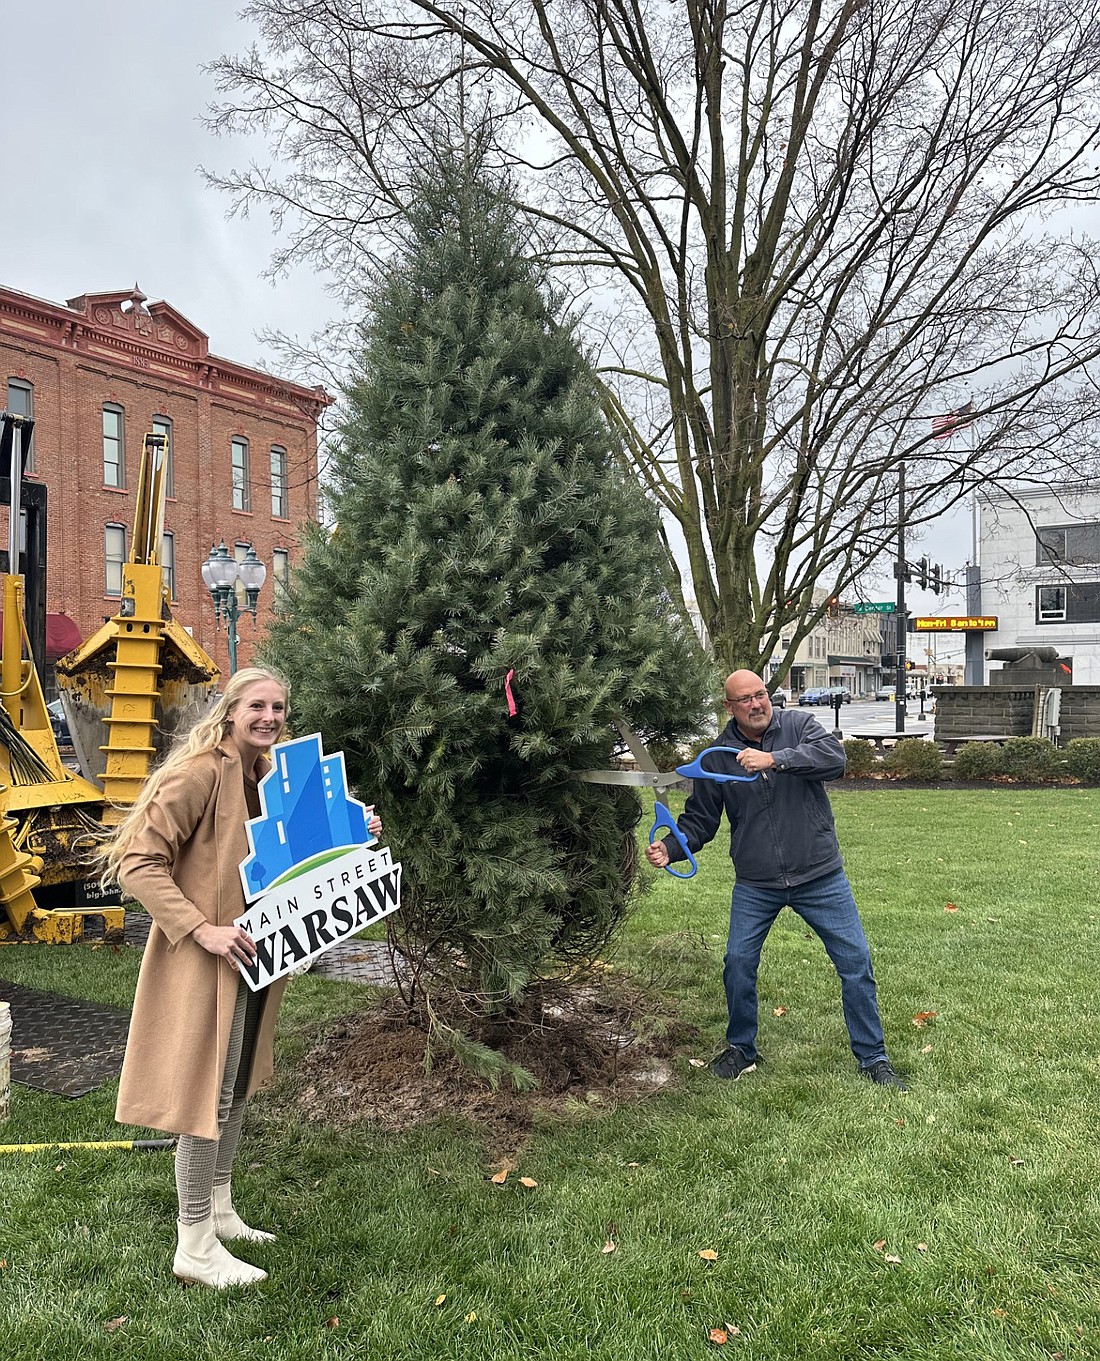 Main Street Warsaw Events Coordinator Mackenzie Parker (L) and Member Relations Manager Scott Wiley celebrate the planting of the concolor fir tree on the southeast lawn of the Kosciusko County courthouse Tuesday. Wiley said Main Street Warsaw donated the tree to the county. Photo by David Slone, Times-Union